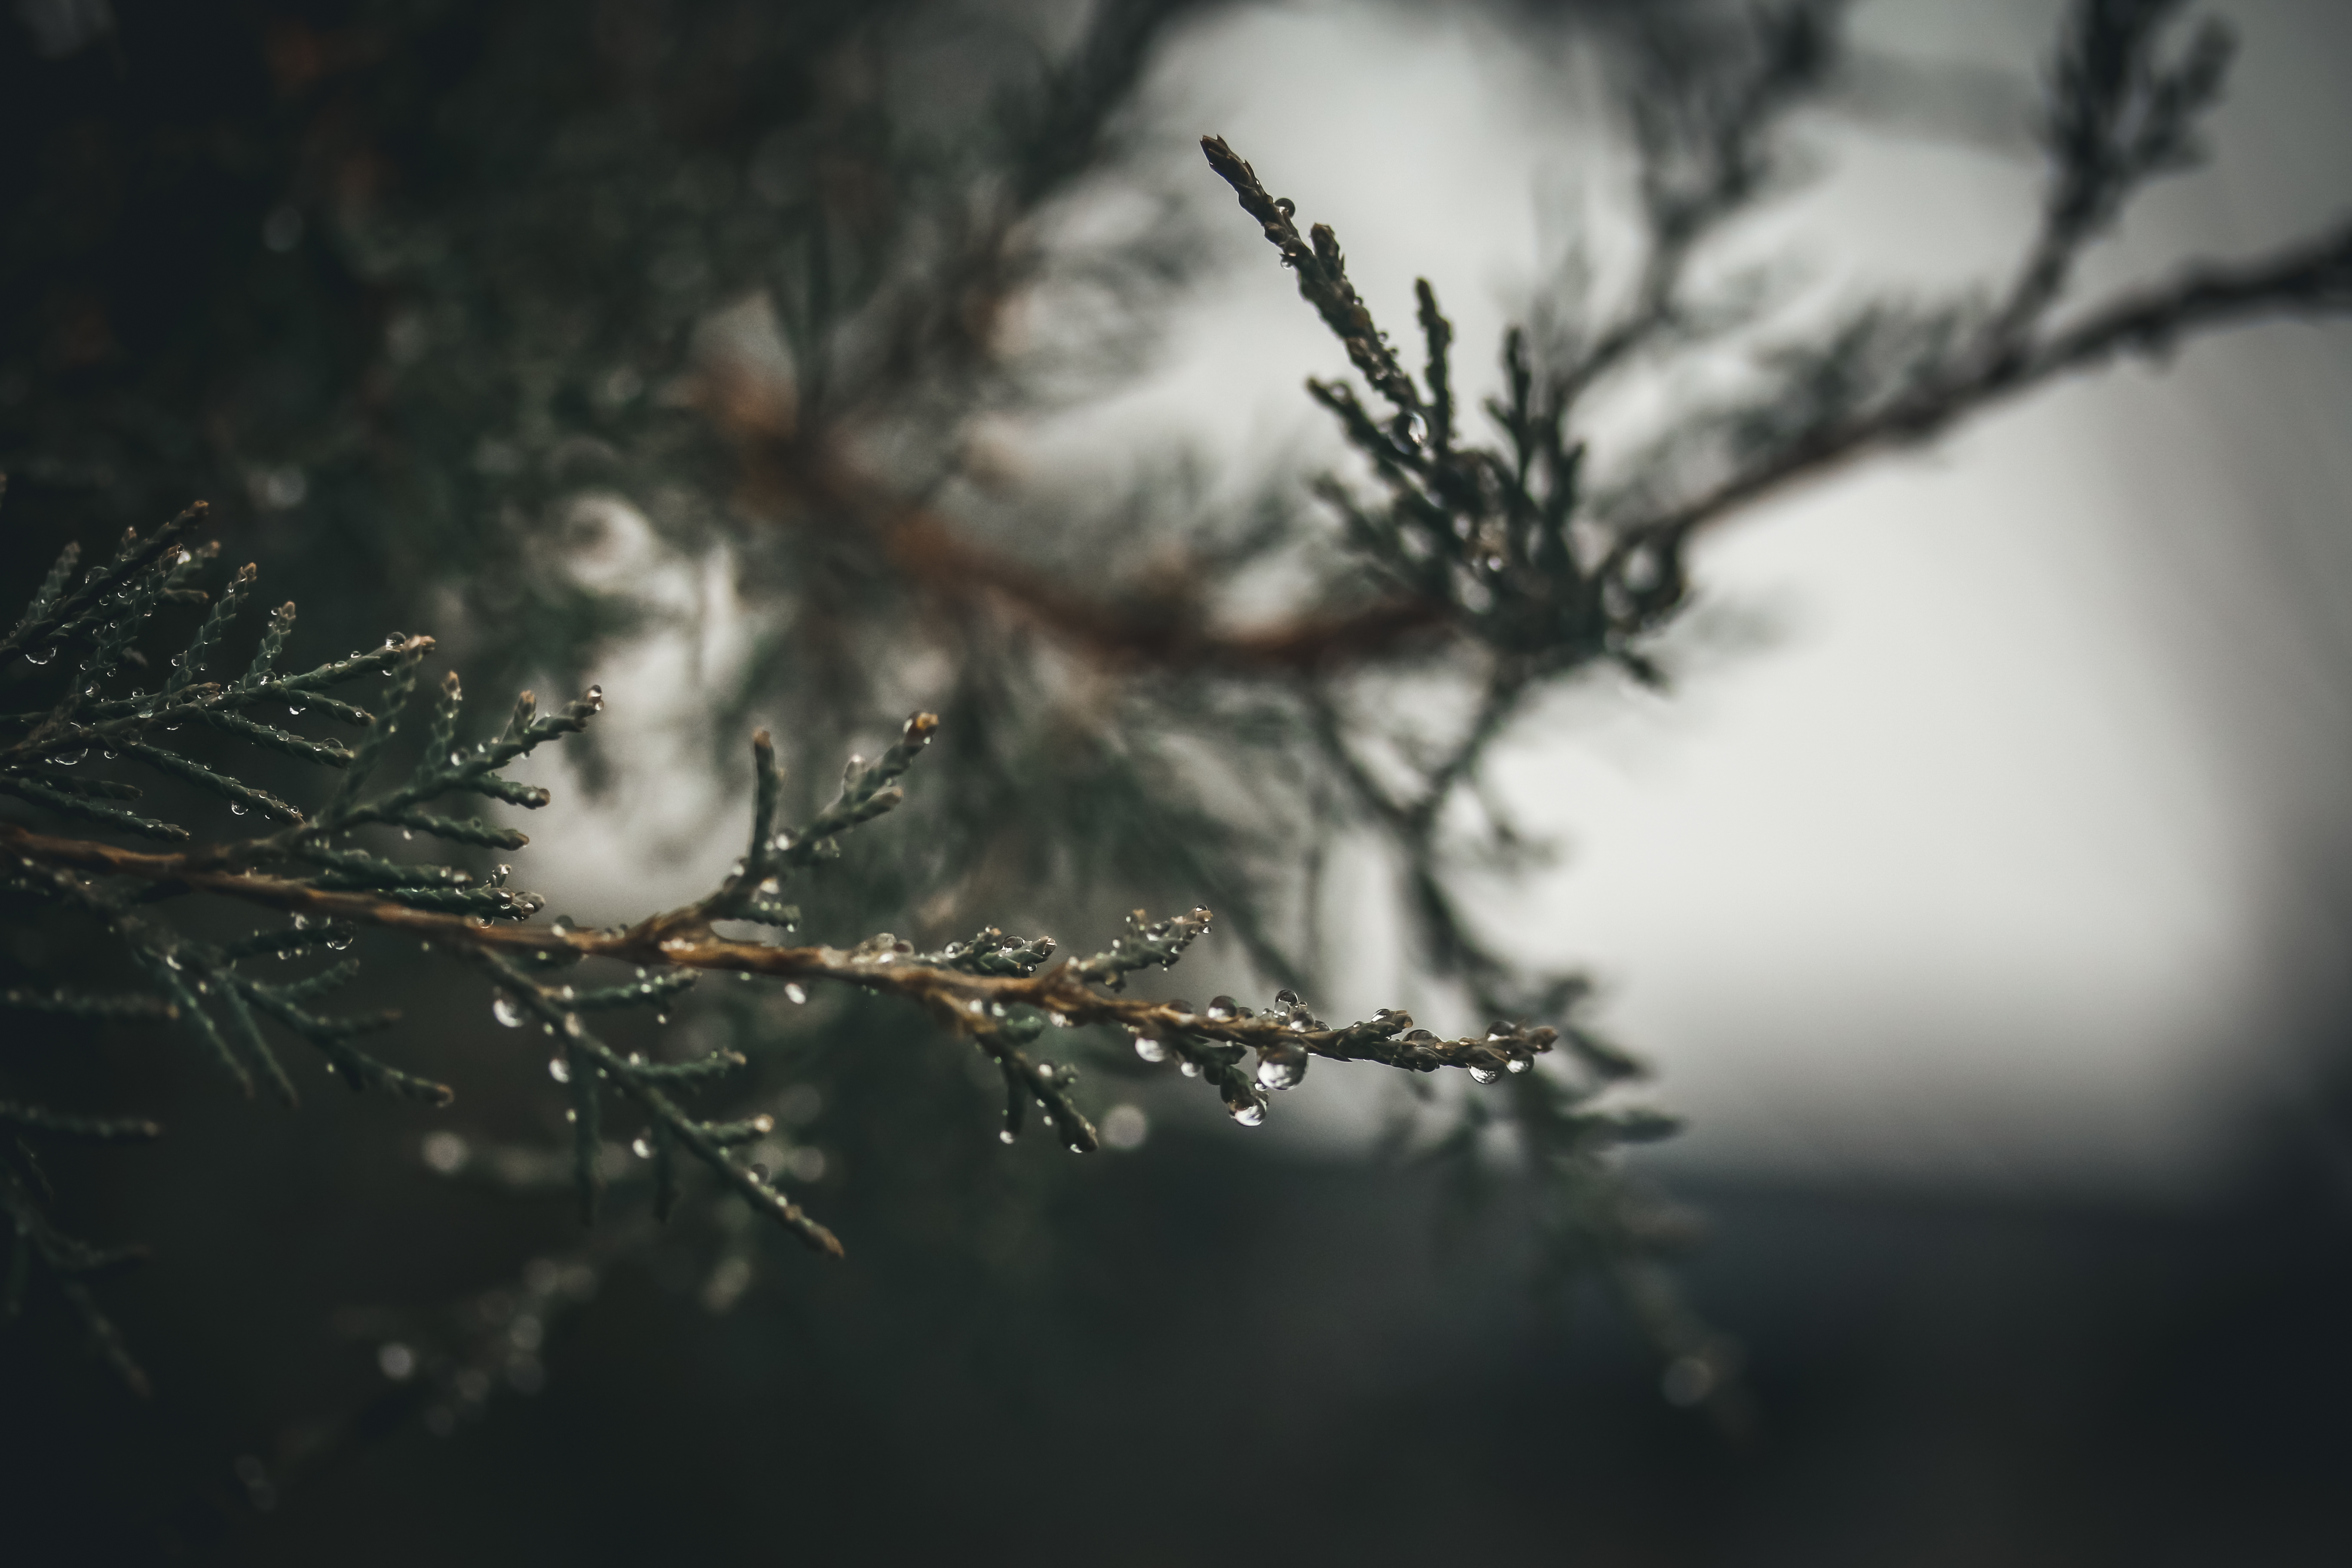 General 5472x3648 pine trees raindrop water drops nature depth of field green muted closeup